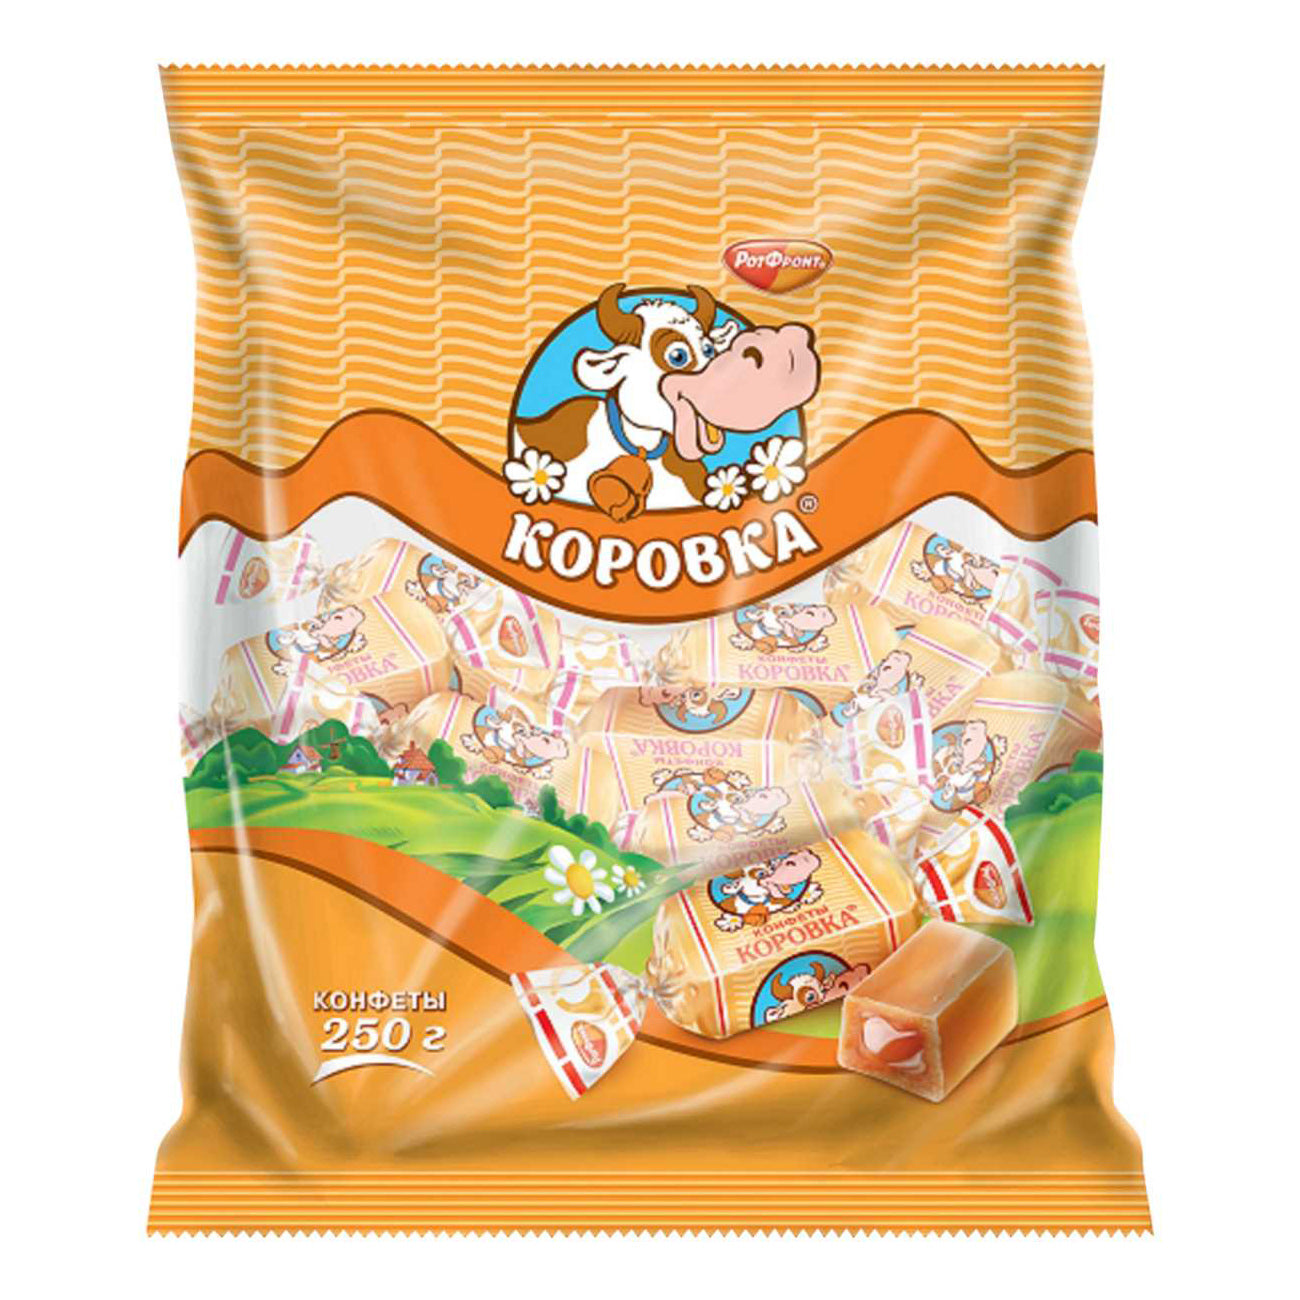 ROTFRONT Korovka Candies Packaged, 180g